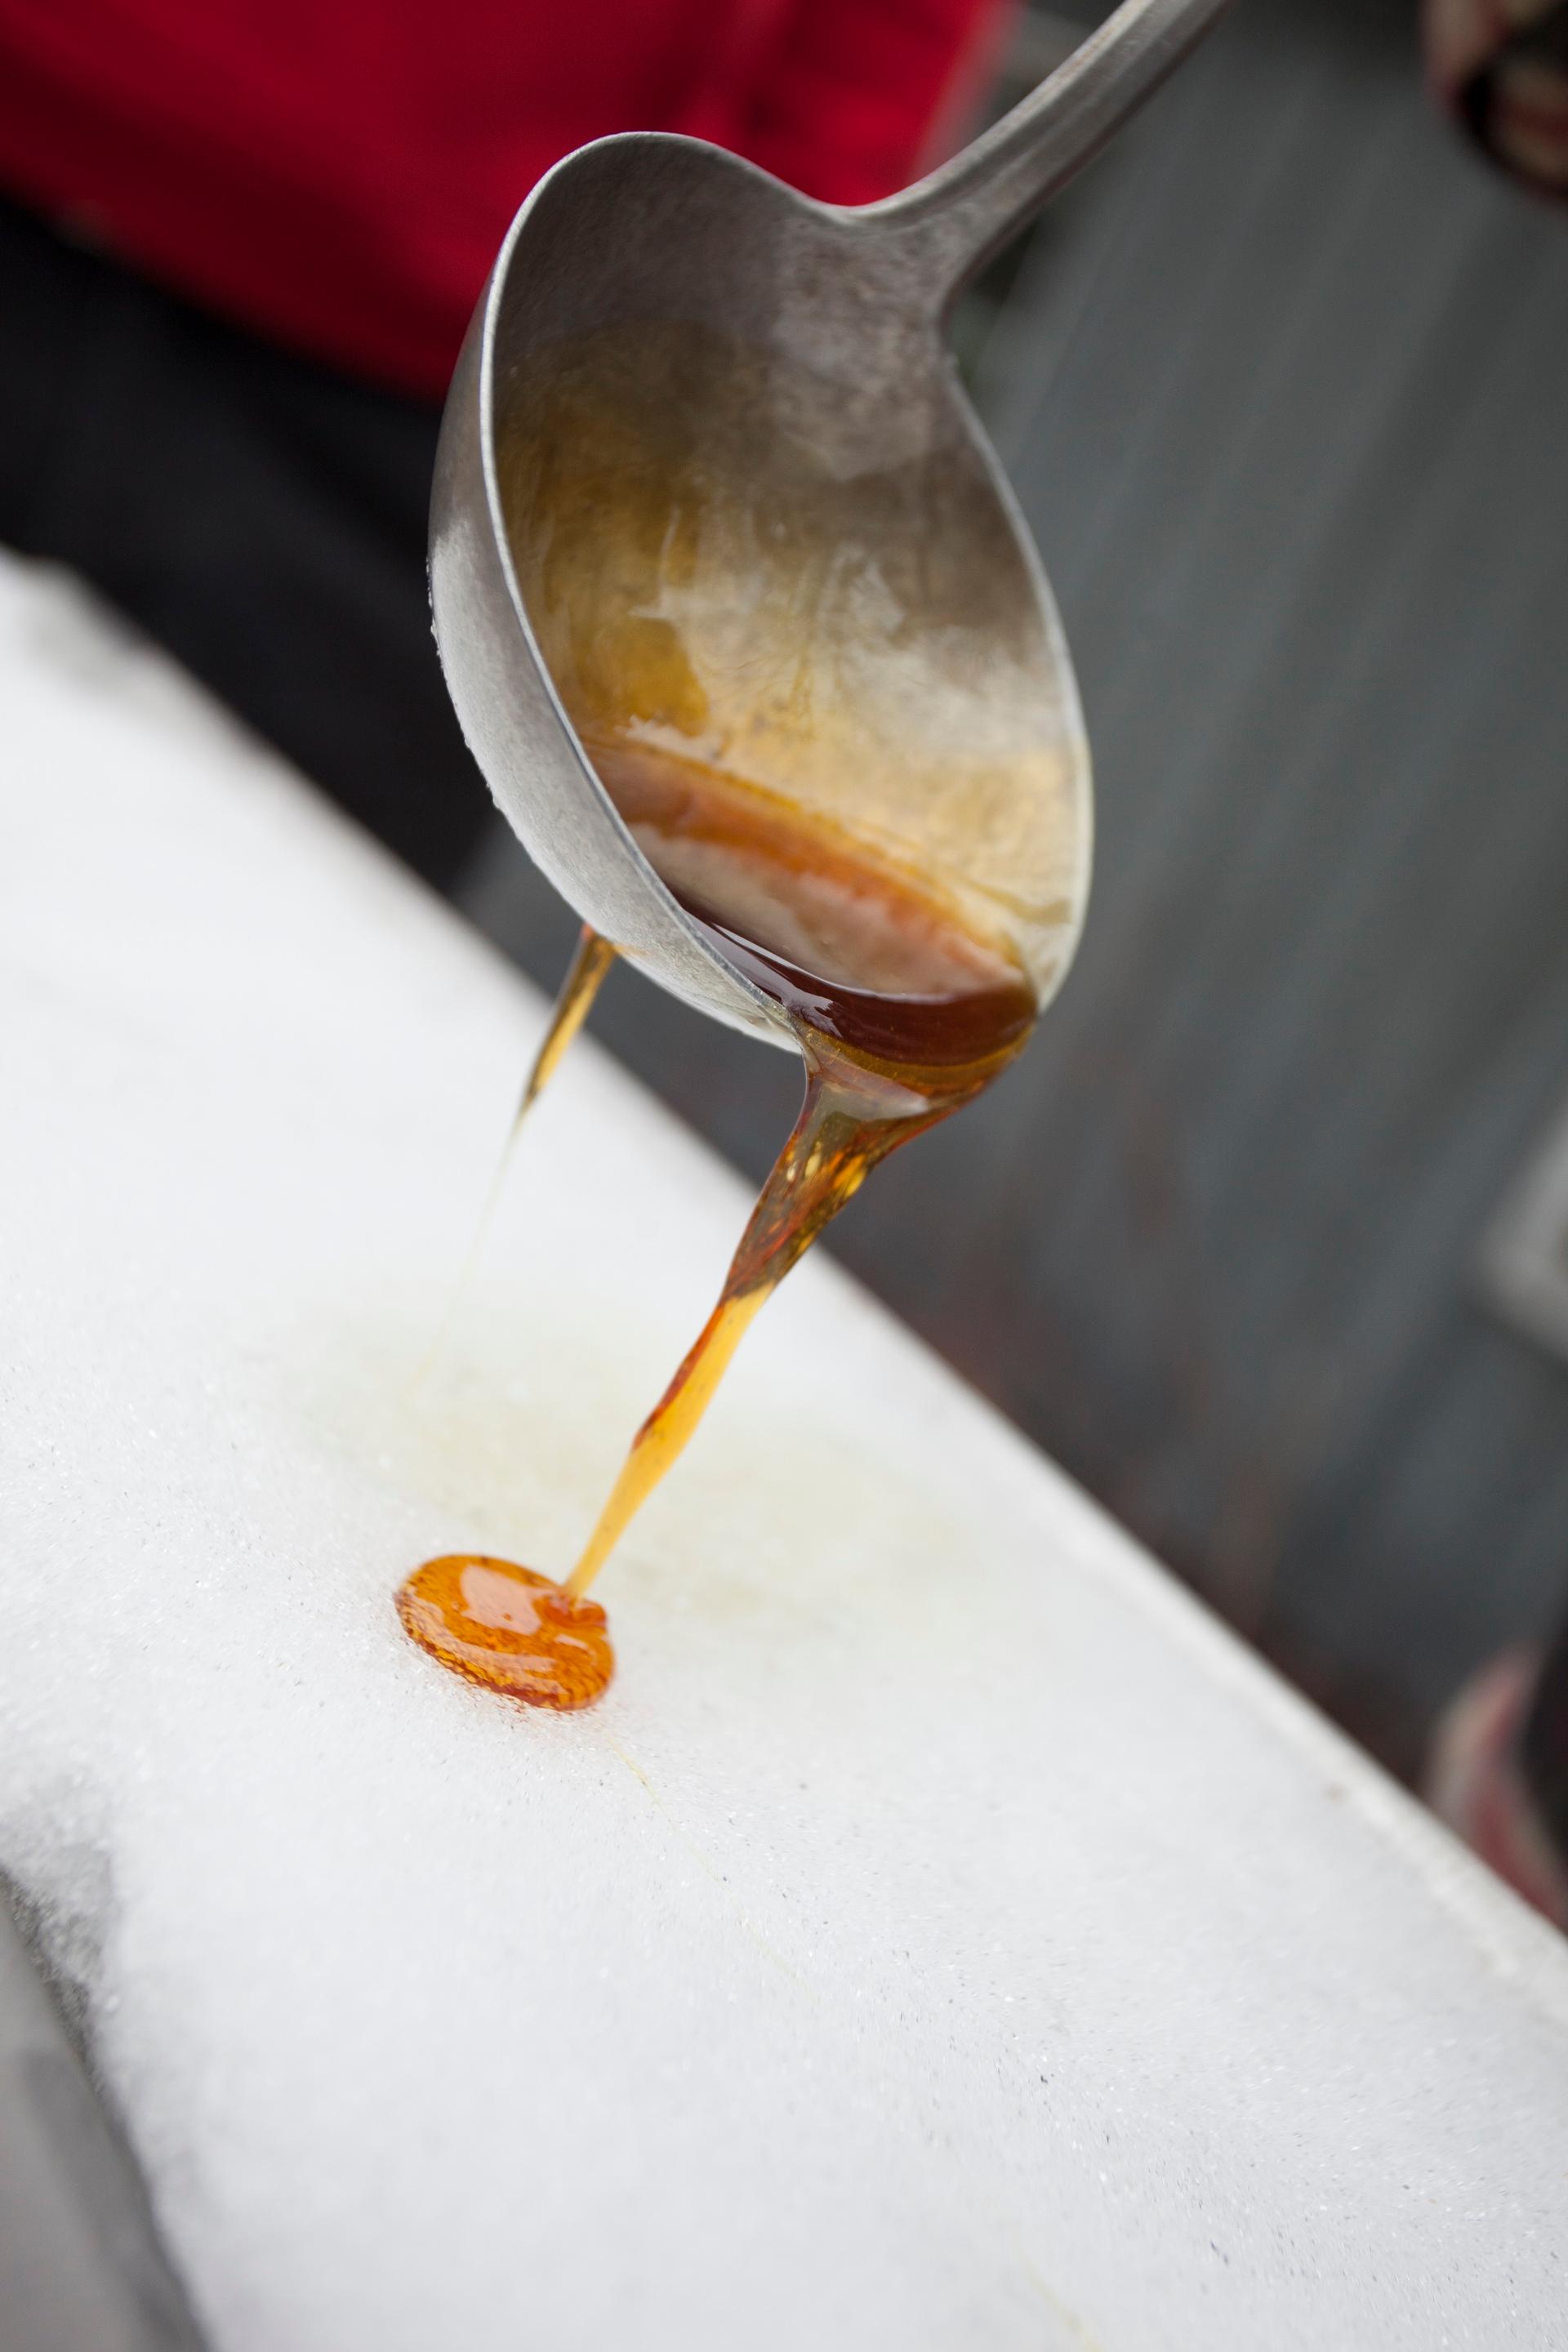 Quebec Maple Syrup